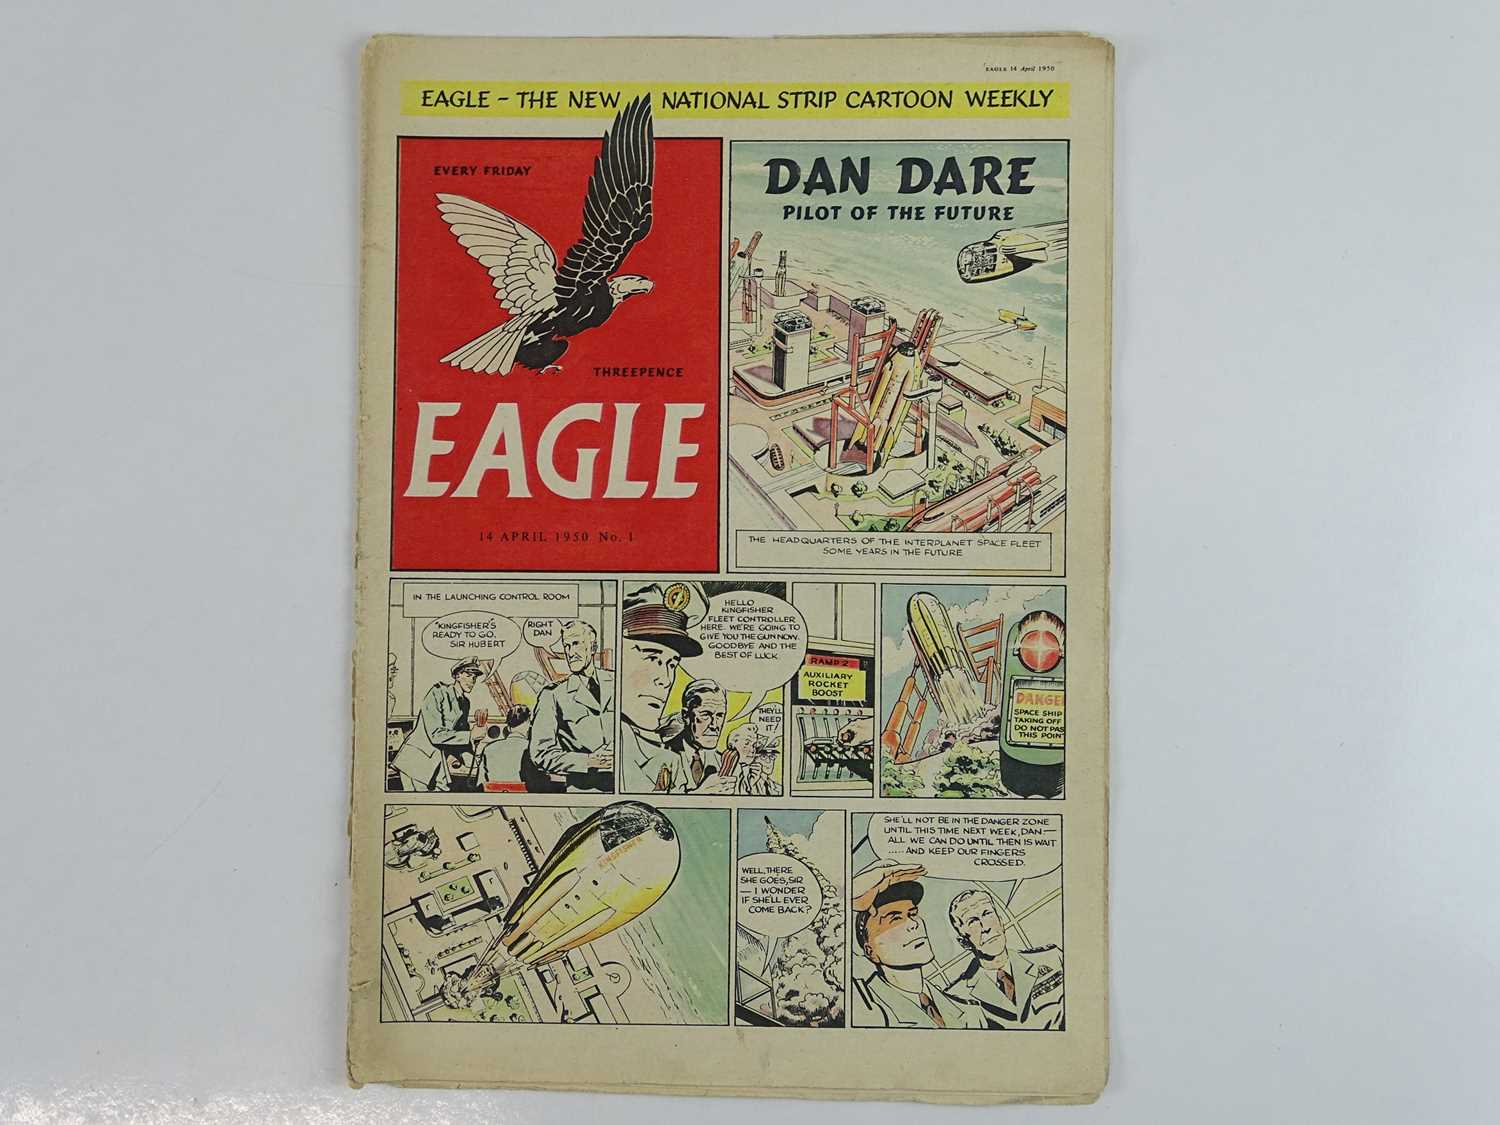 EAGLE COMIC LOT (53 in Lot) - (1950 - Hulton Press / IPC Magazines) Includes complete Fifty-Two (52) - Image 2 of 8